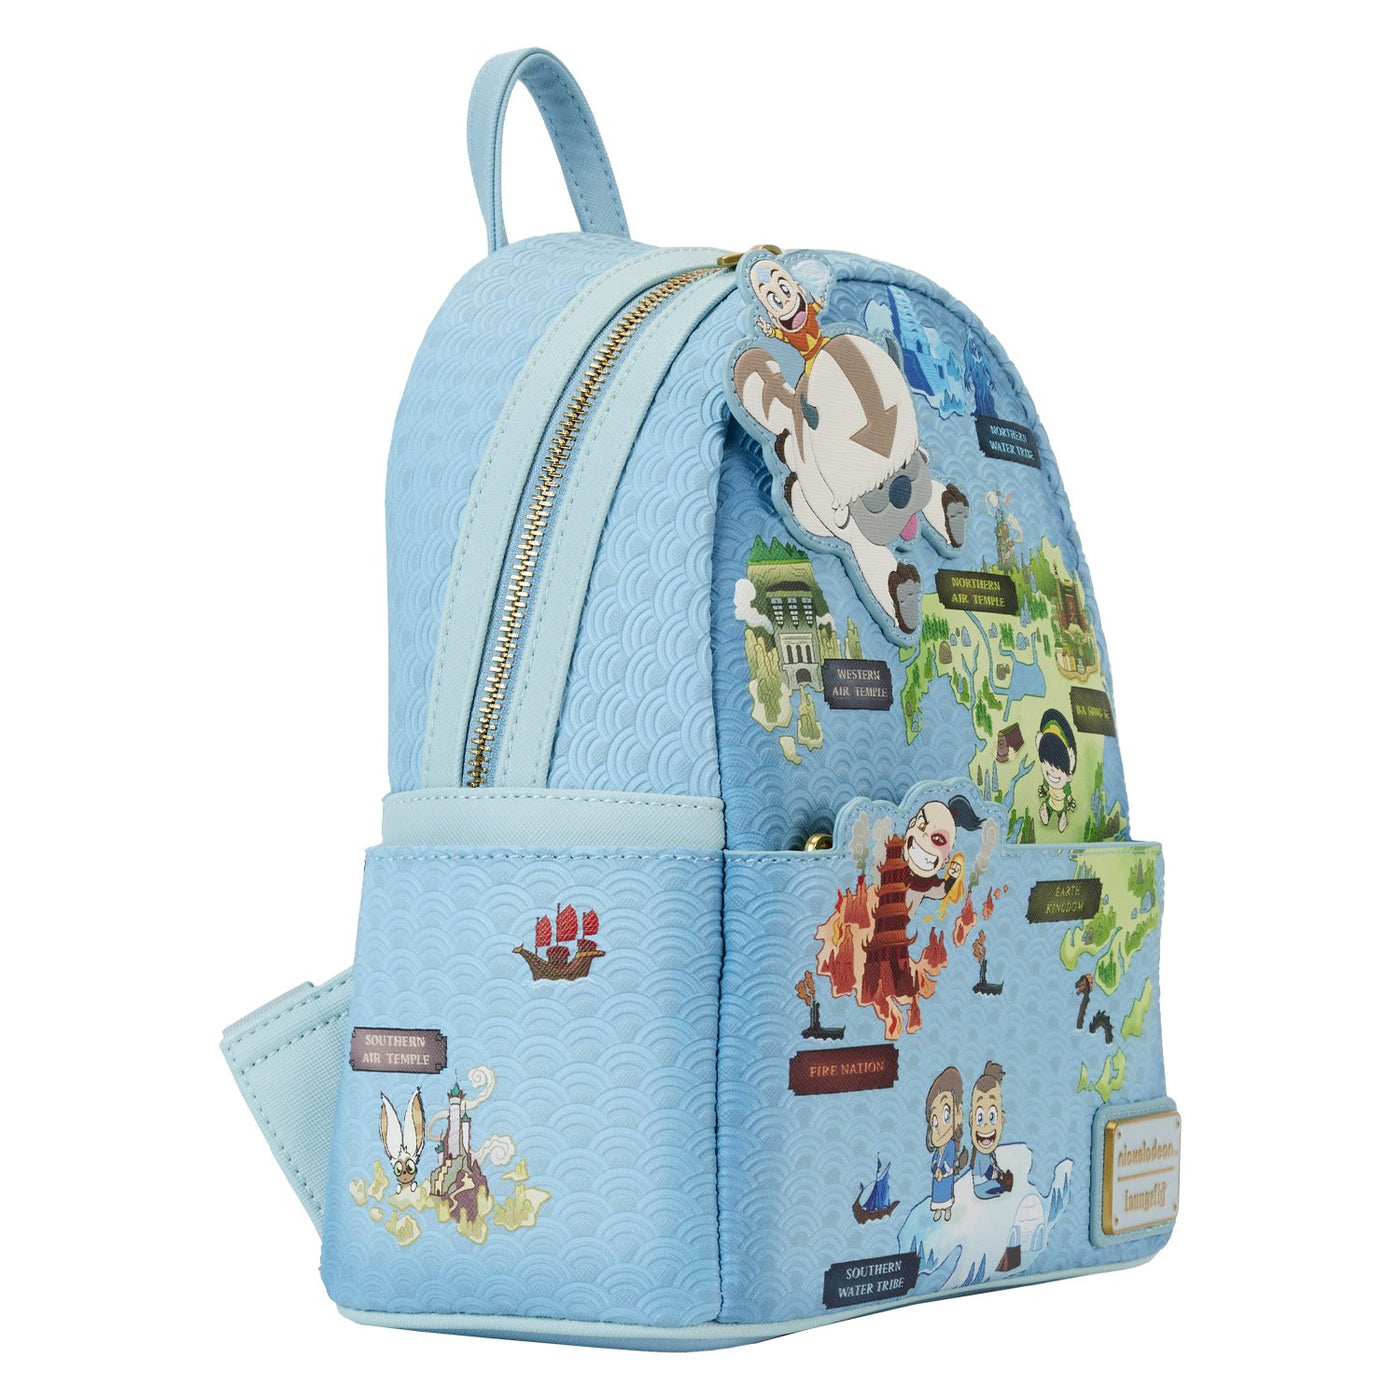 Loungefly Nickelodeon Avatar the Last Airbender Map Mini Backpack - Alternate Side View